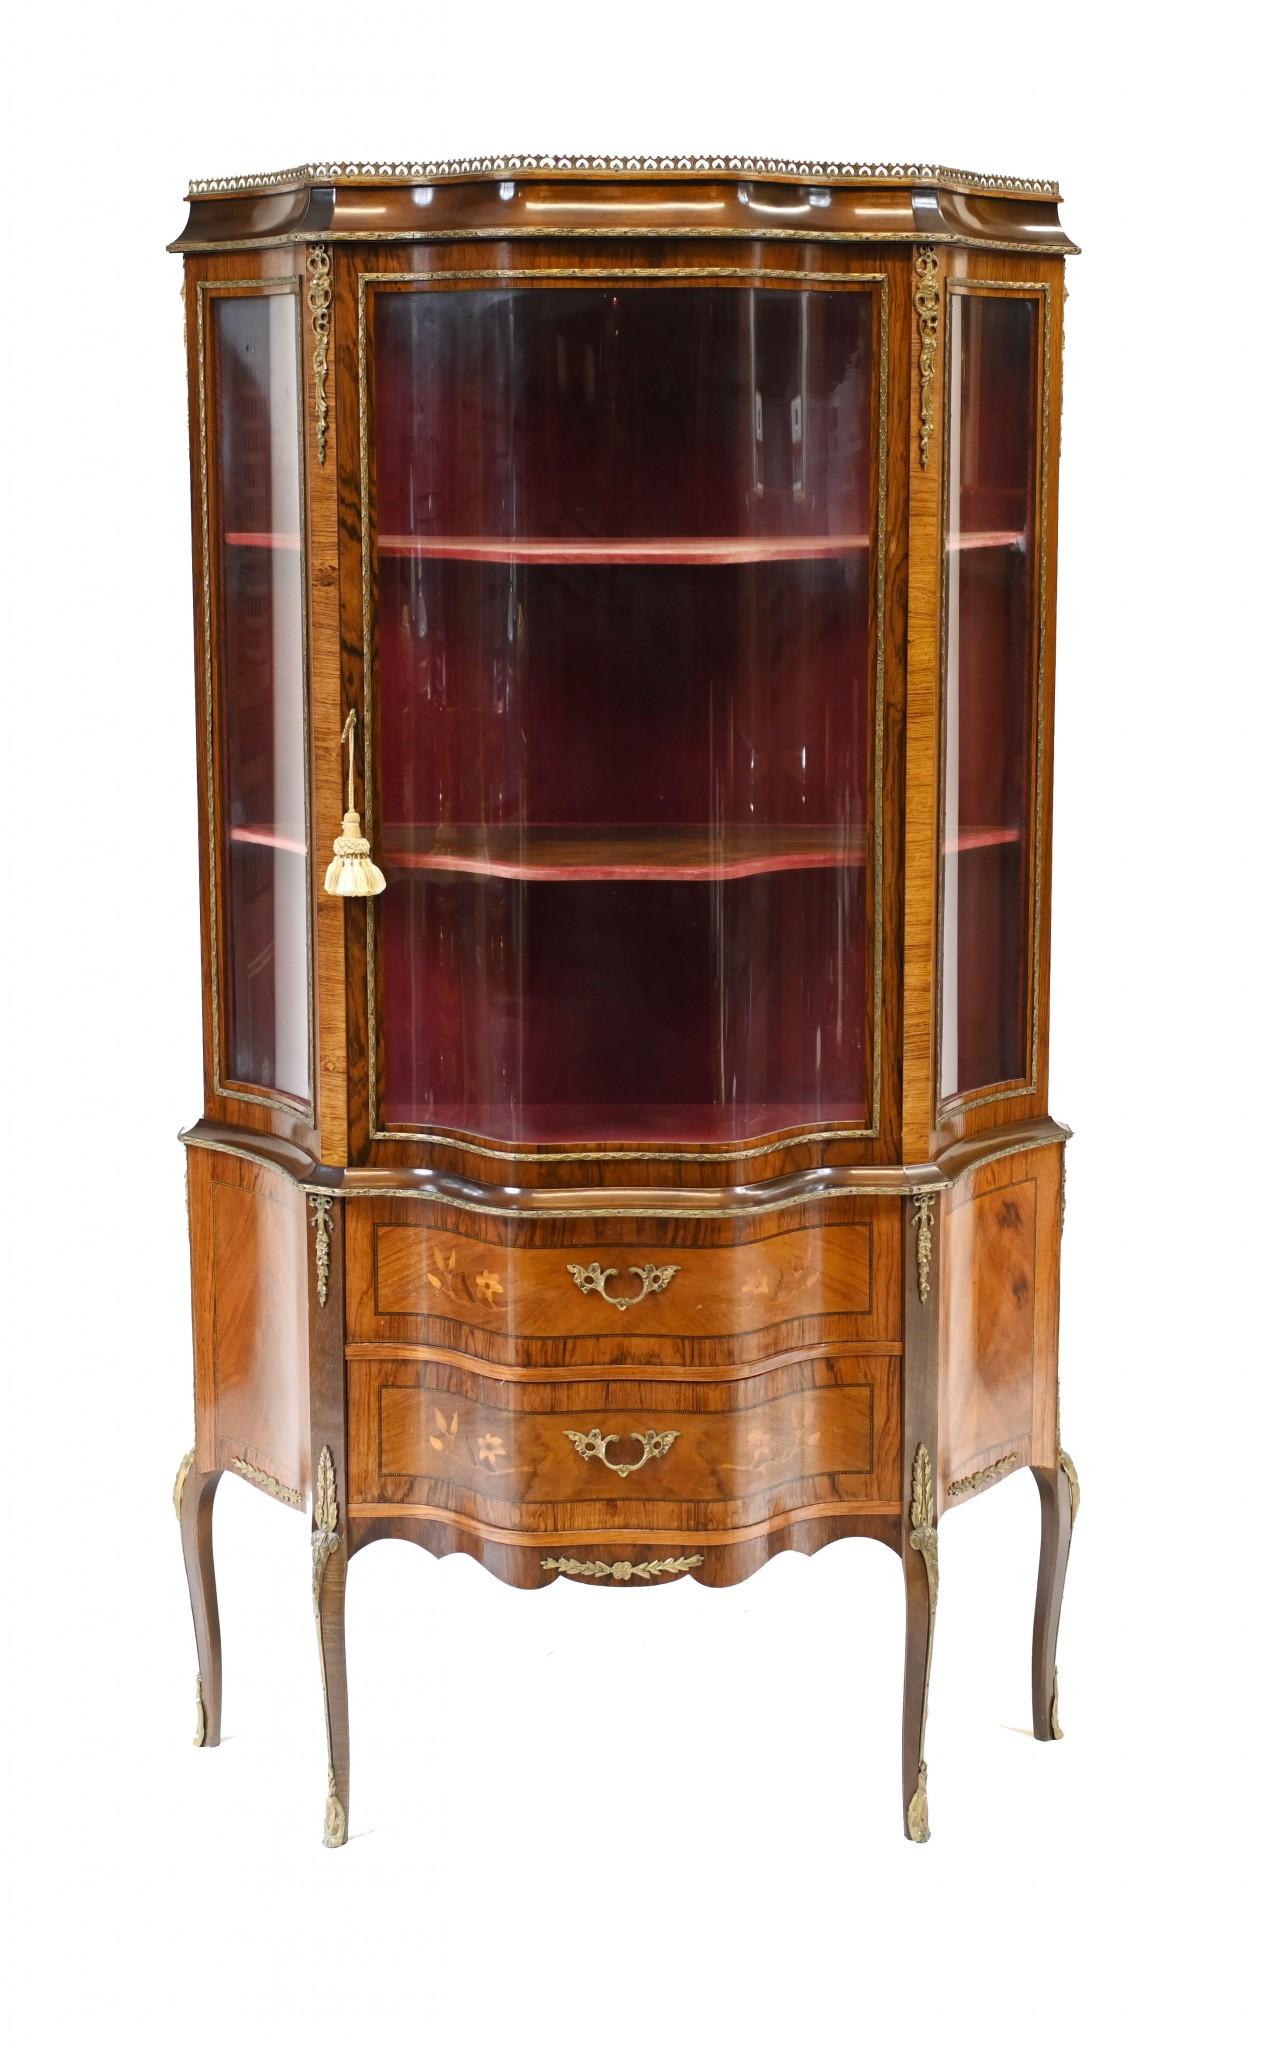 Elegant antique French vitrine on cabriole legs
Features crossbanded drawers and sides
Circa 1880
Great china cabinet or bijuouterie perfect for displaying decorative pieces
Bought from a dealer at Les Puces antiques market in Paris 
Some of